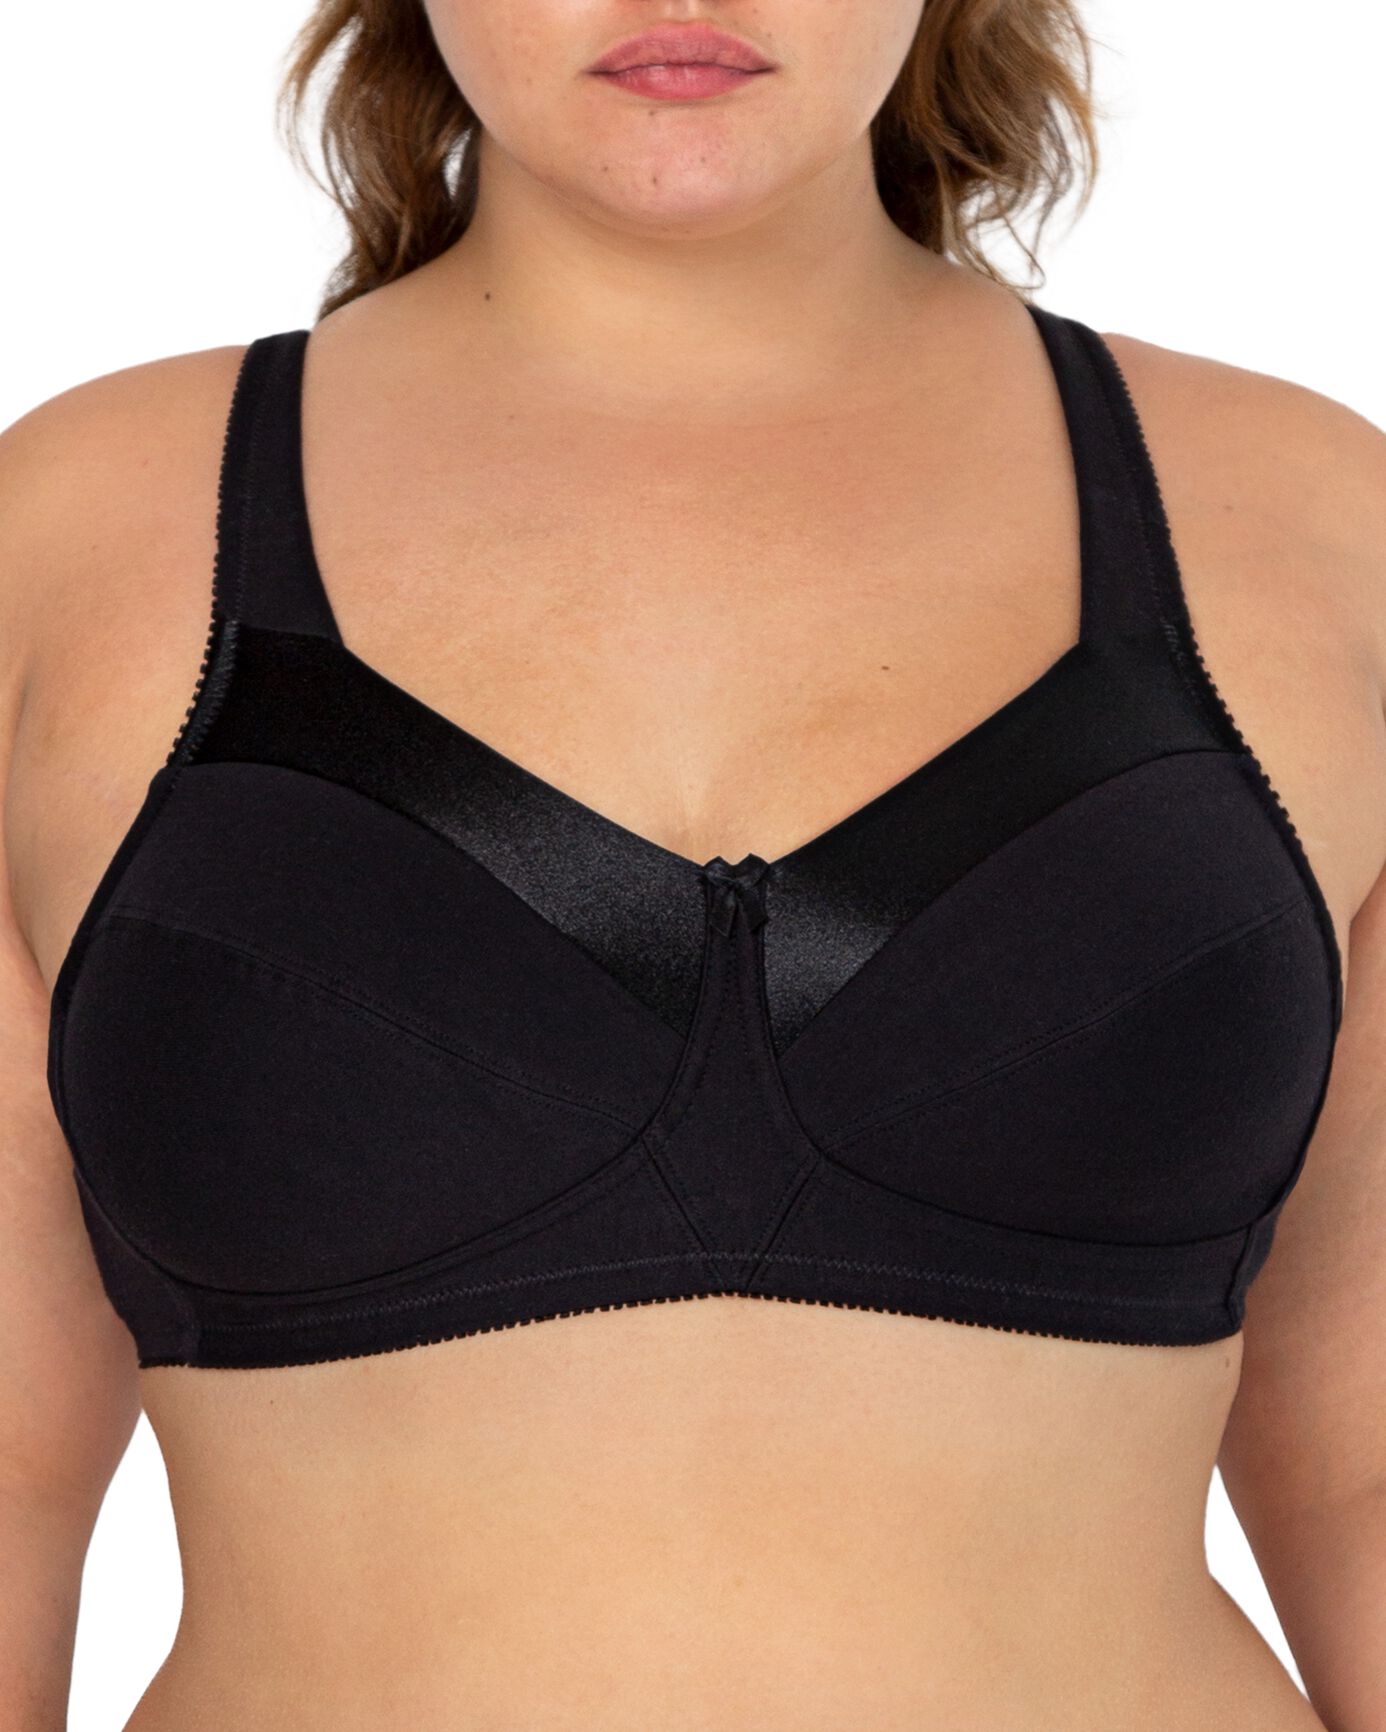 shoppers have left rave reviews for these soft and comfortable  wire-free bras